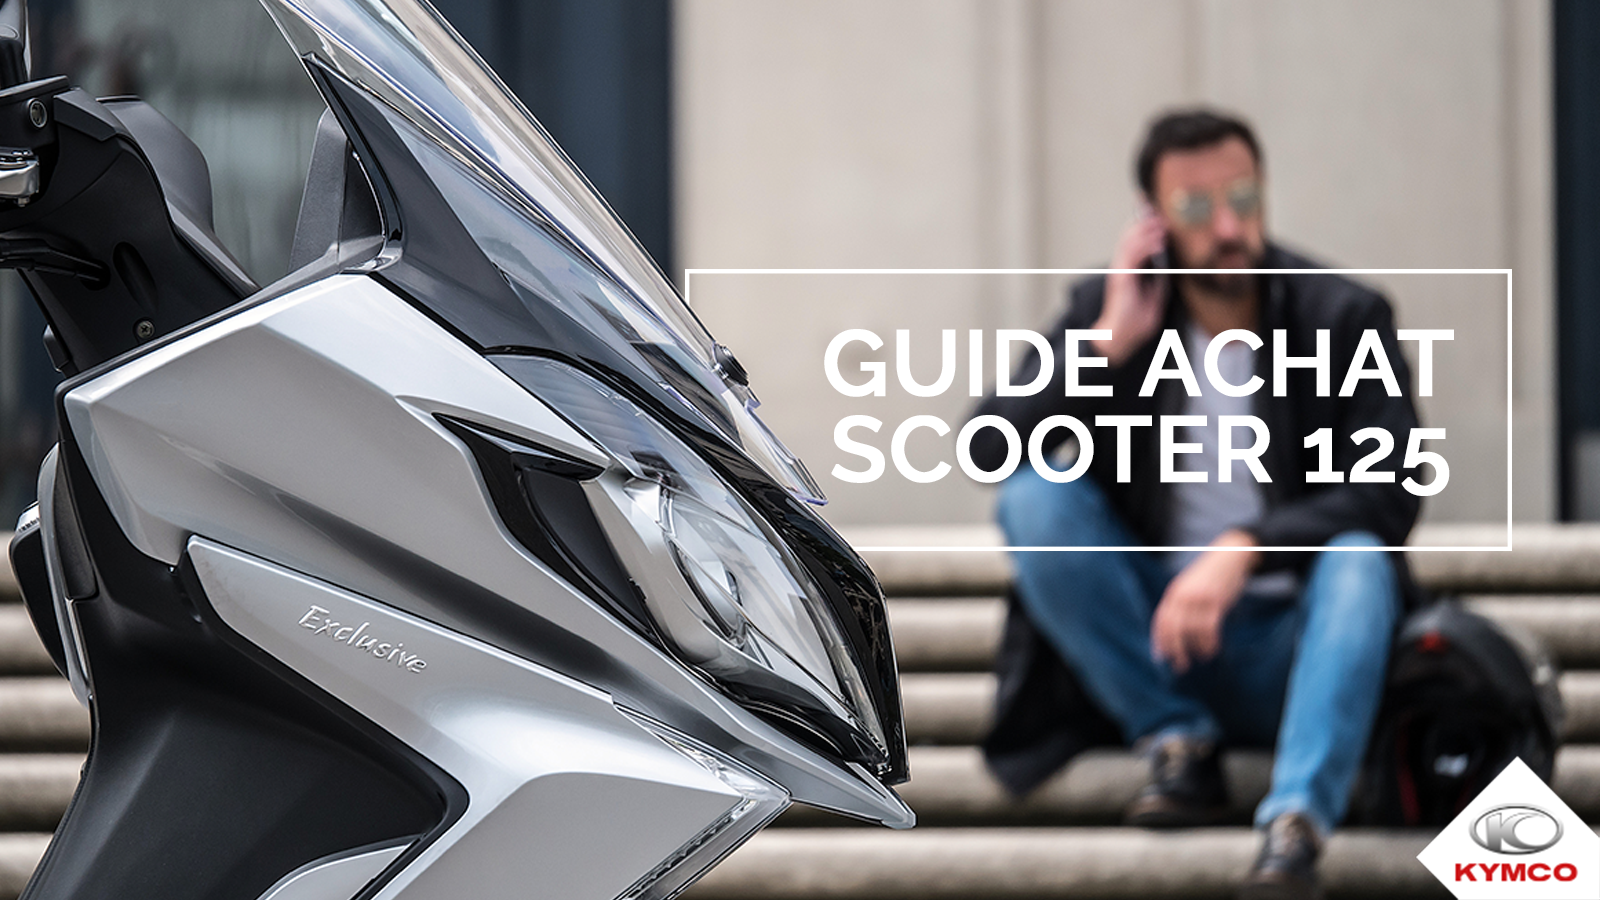 Guide_achat_scooters125-featured